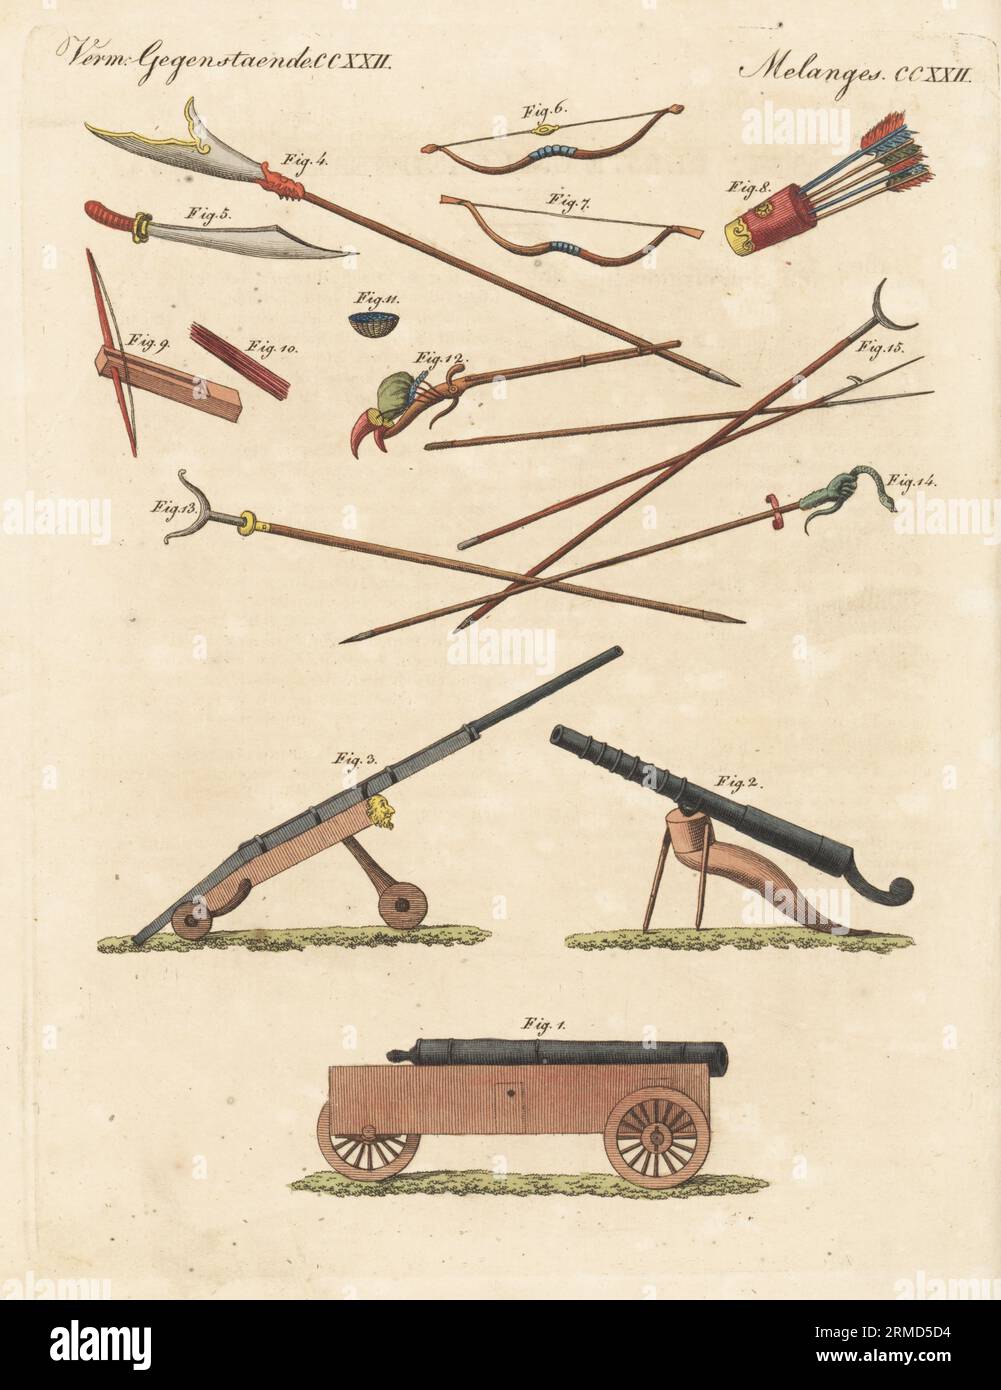 Chinese fire-arms and other weapons. Large artillery cannon 1, old cannon 2, culverin 3, halberd 4, cavalry sabre 5, bows 6,7, quiver 8, crossbow 9, darts 10, lead balls 11, musket 12 and rest 13, hand with serpent symbolizing prudence 14, and lances 15. Copied from an illustration by Antoine Cardon in Jean Baptiste Joseph Breton's La Chine en miniature, 1811. Handcoloured copperplate engraving from Carl Bertuch's Bilderbuch fur Kinder (Picture Book for Children), Weimar, 1815. Stock Photo